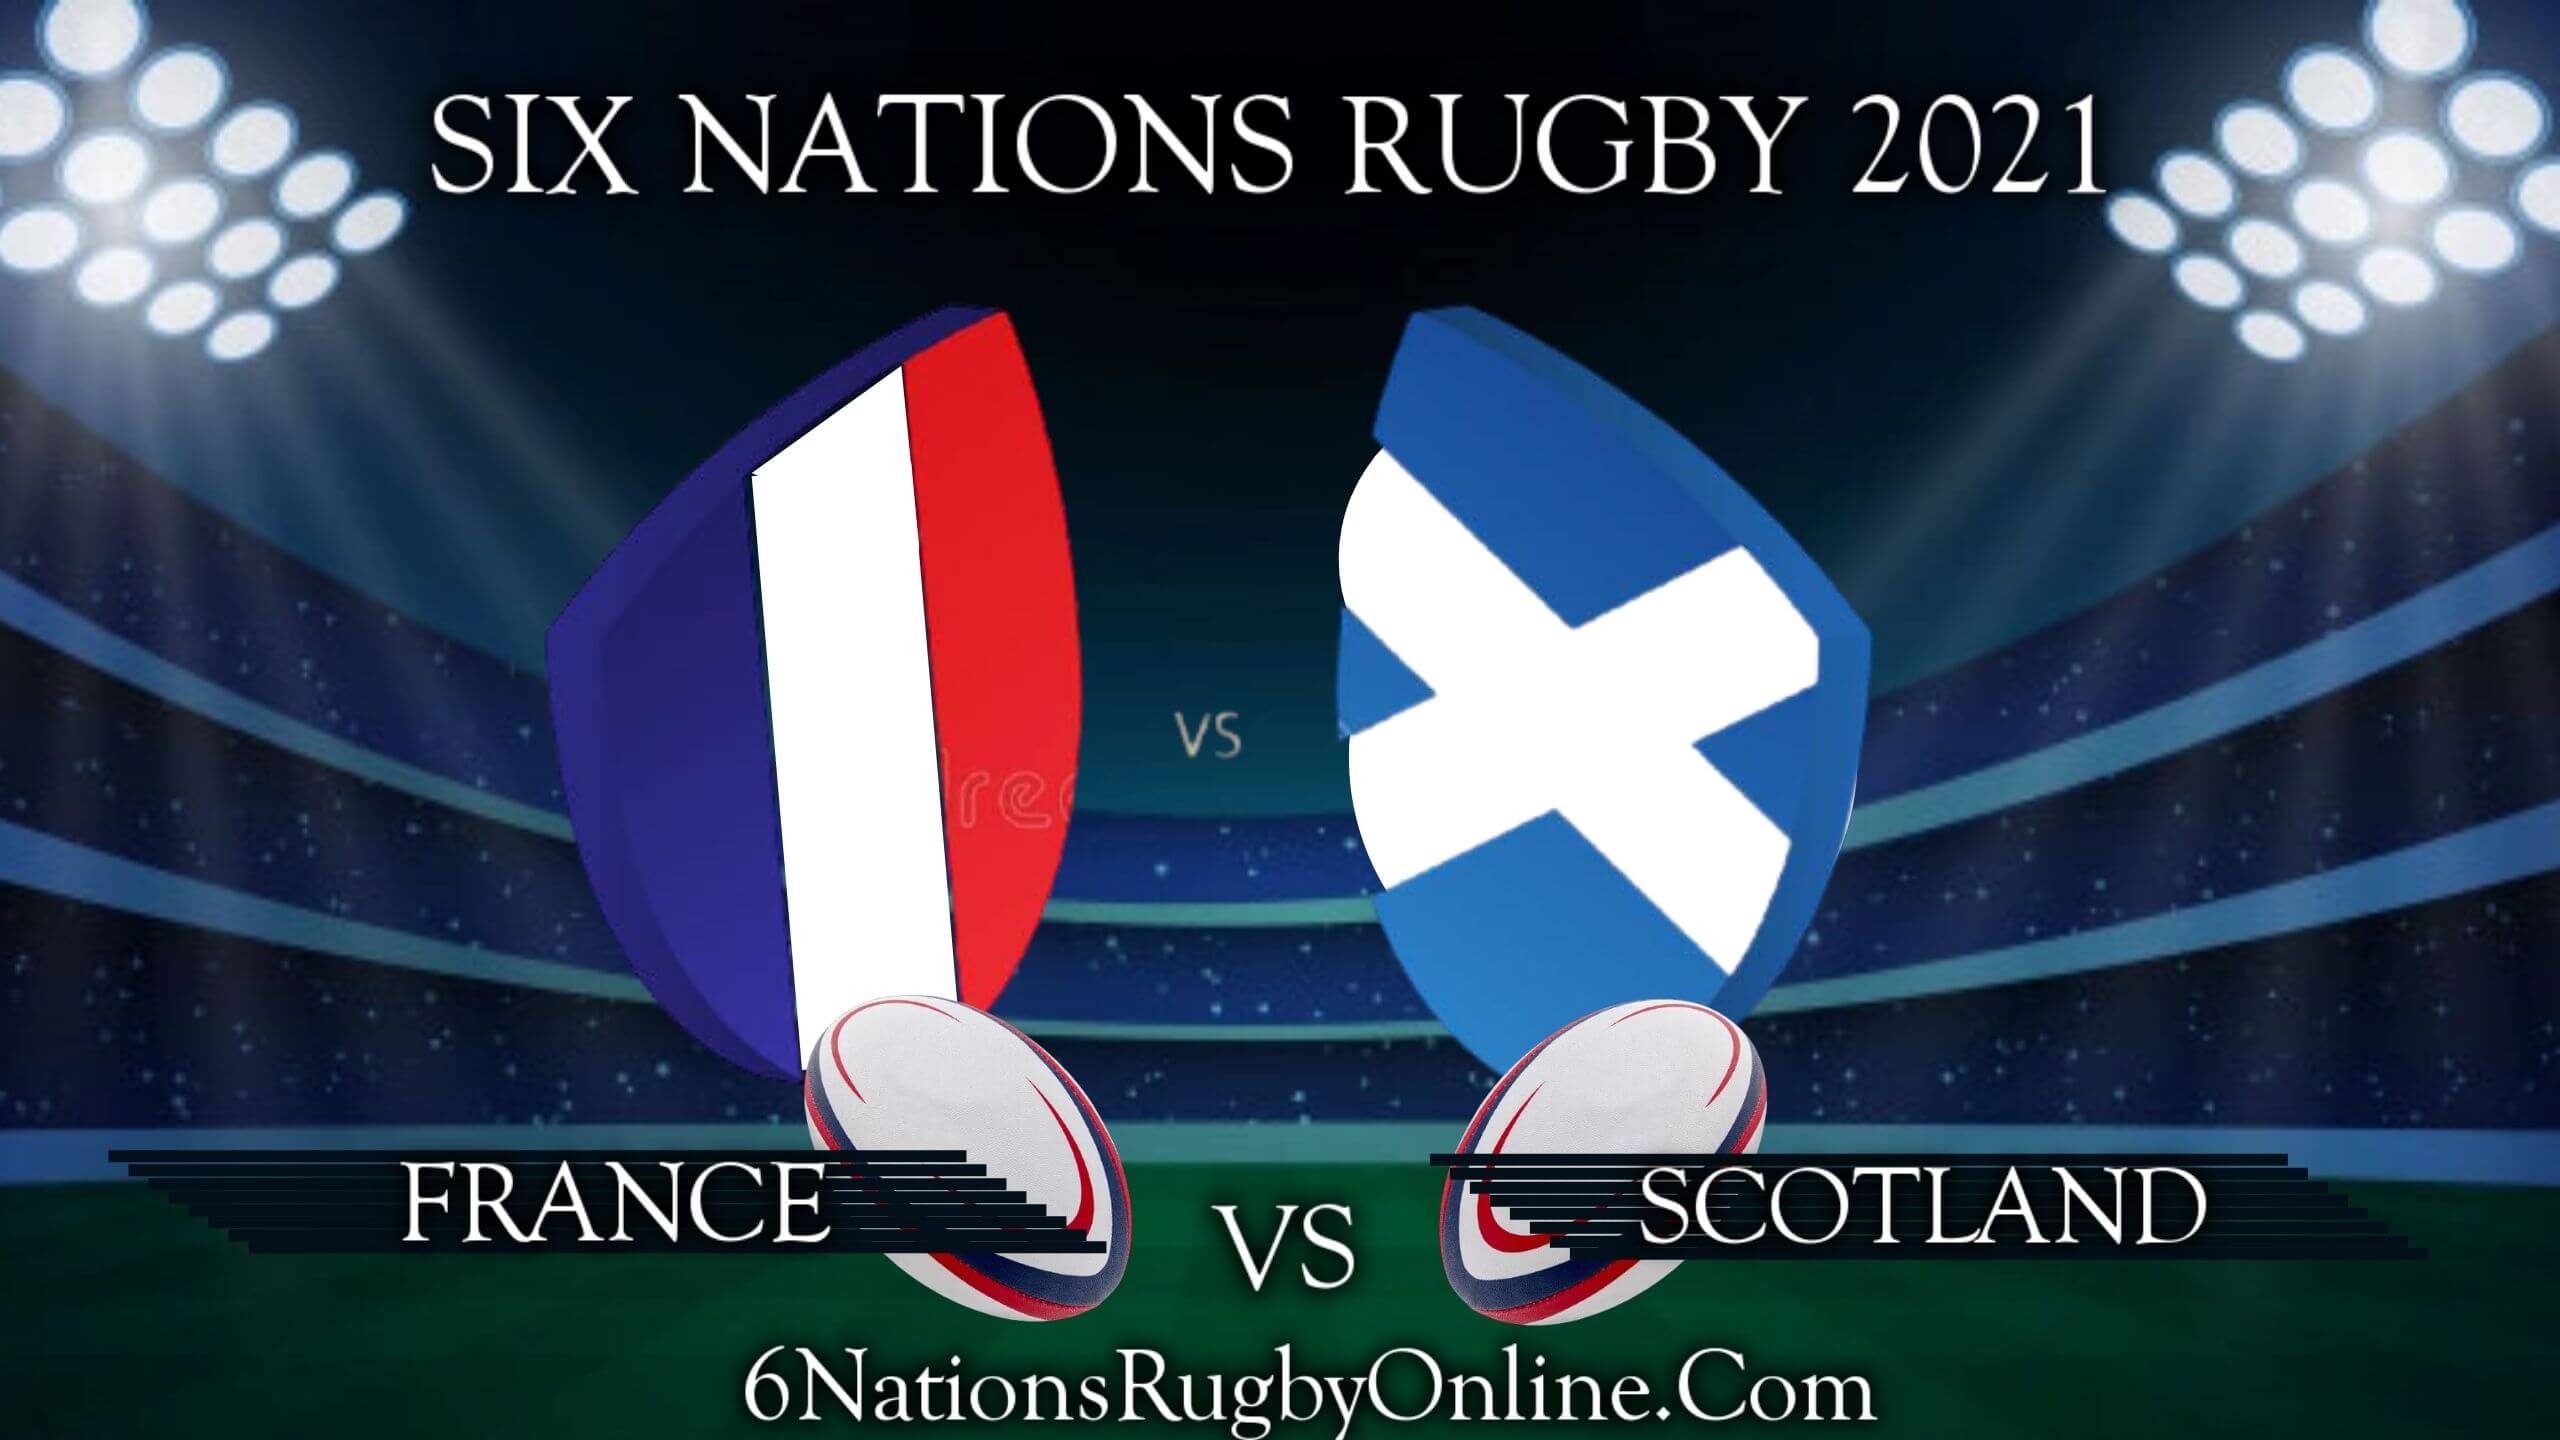 France vs Scotland Resut 2021 Rd 3 | Six Nations Rugby